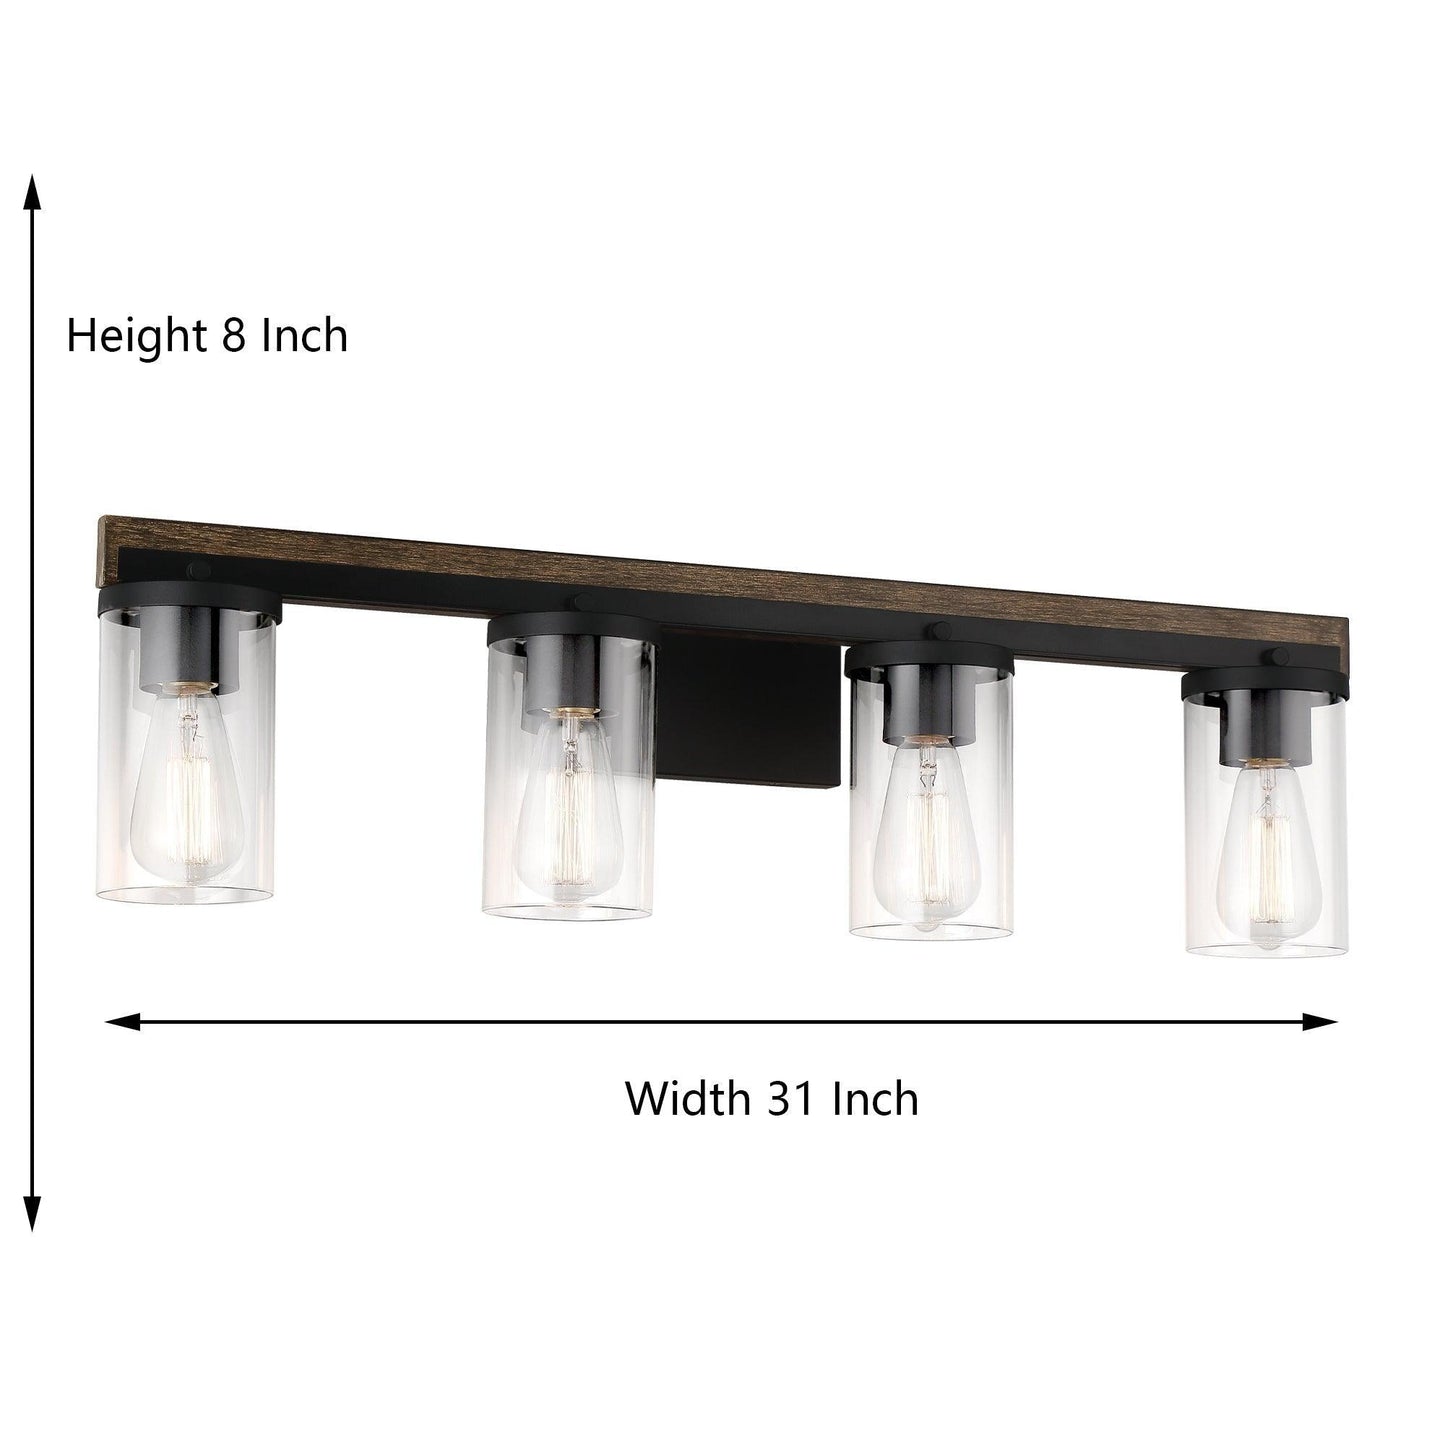 1404 | 4 - Light Dimmable Vanity Light | ACROMA - ACROMA